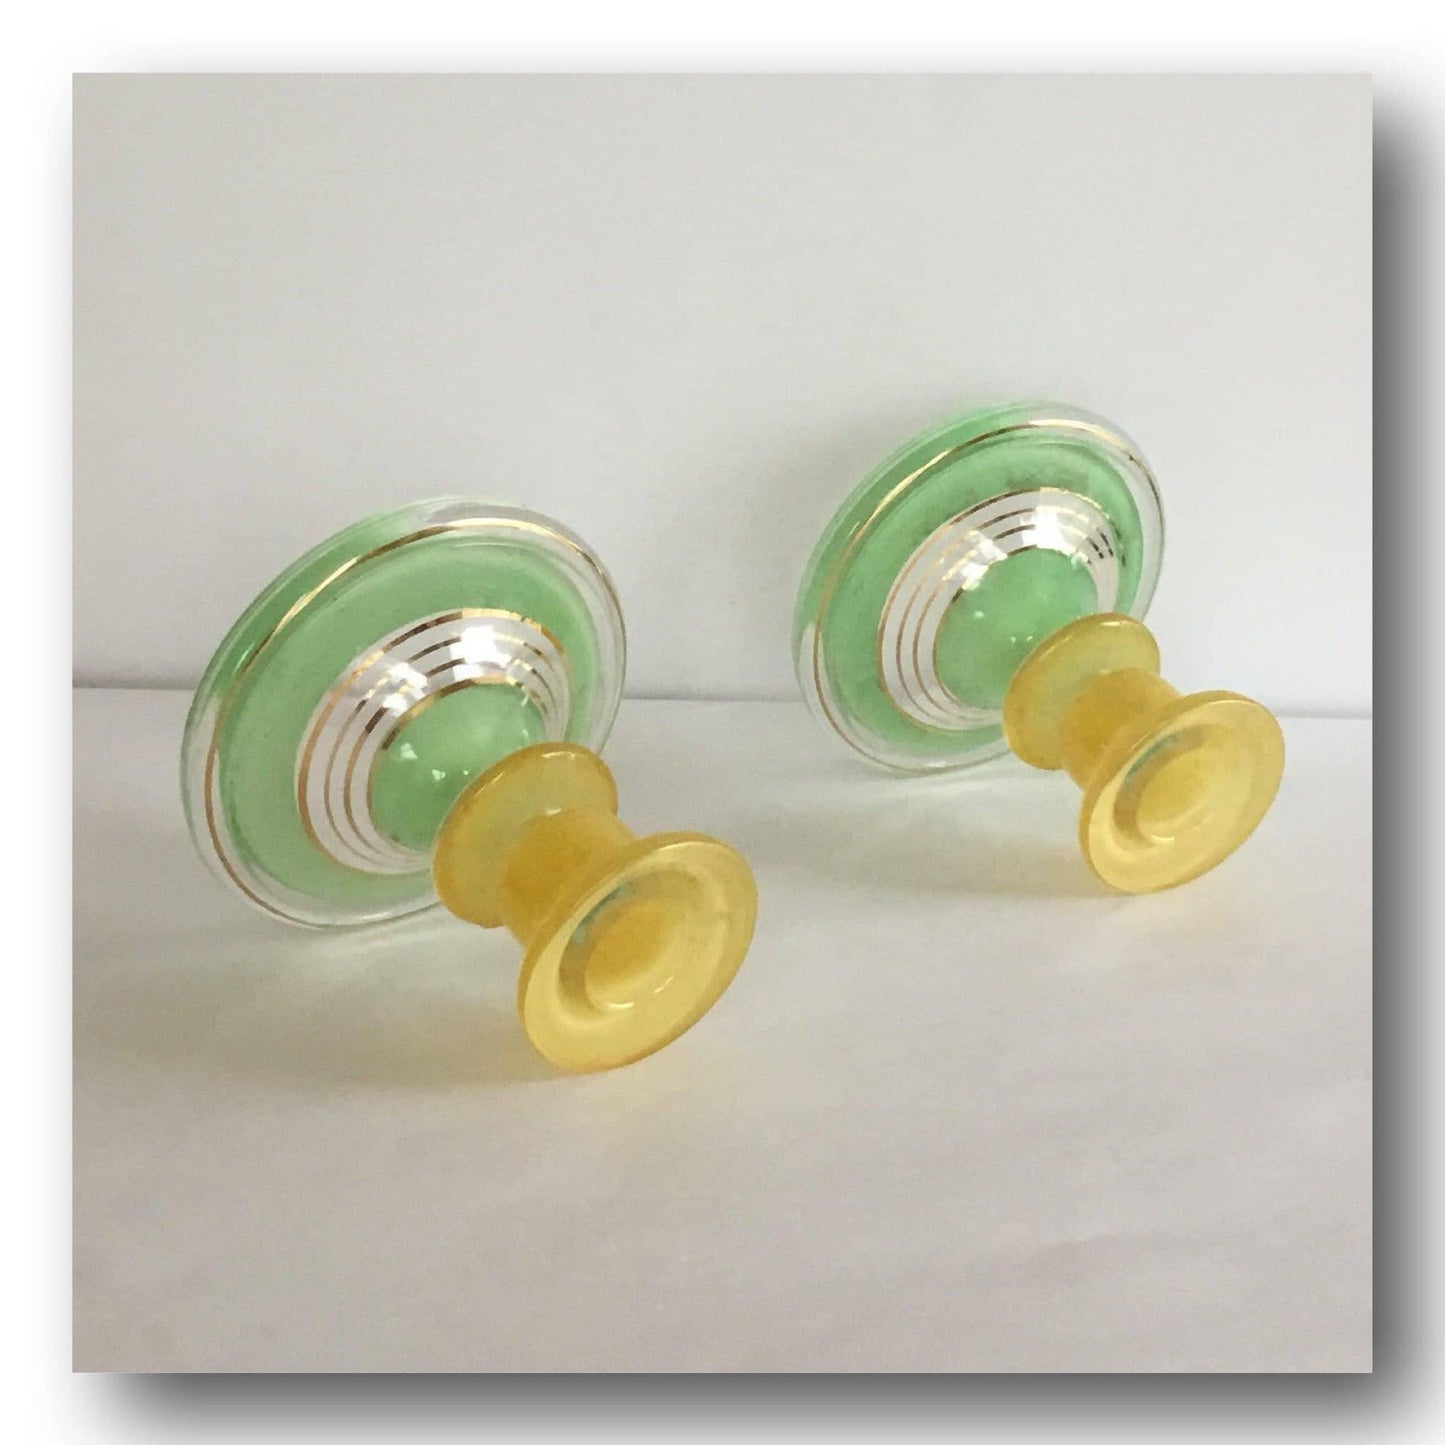 Vintage glass candlesticks holders green yellow gold bands